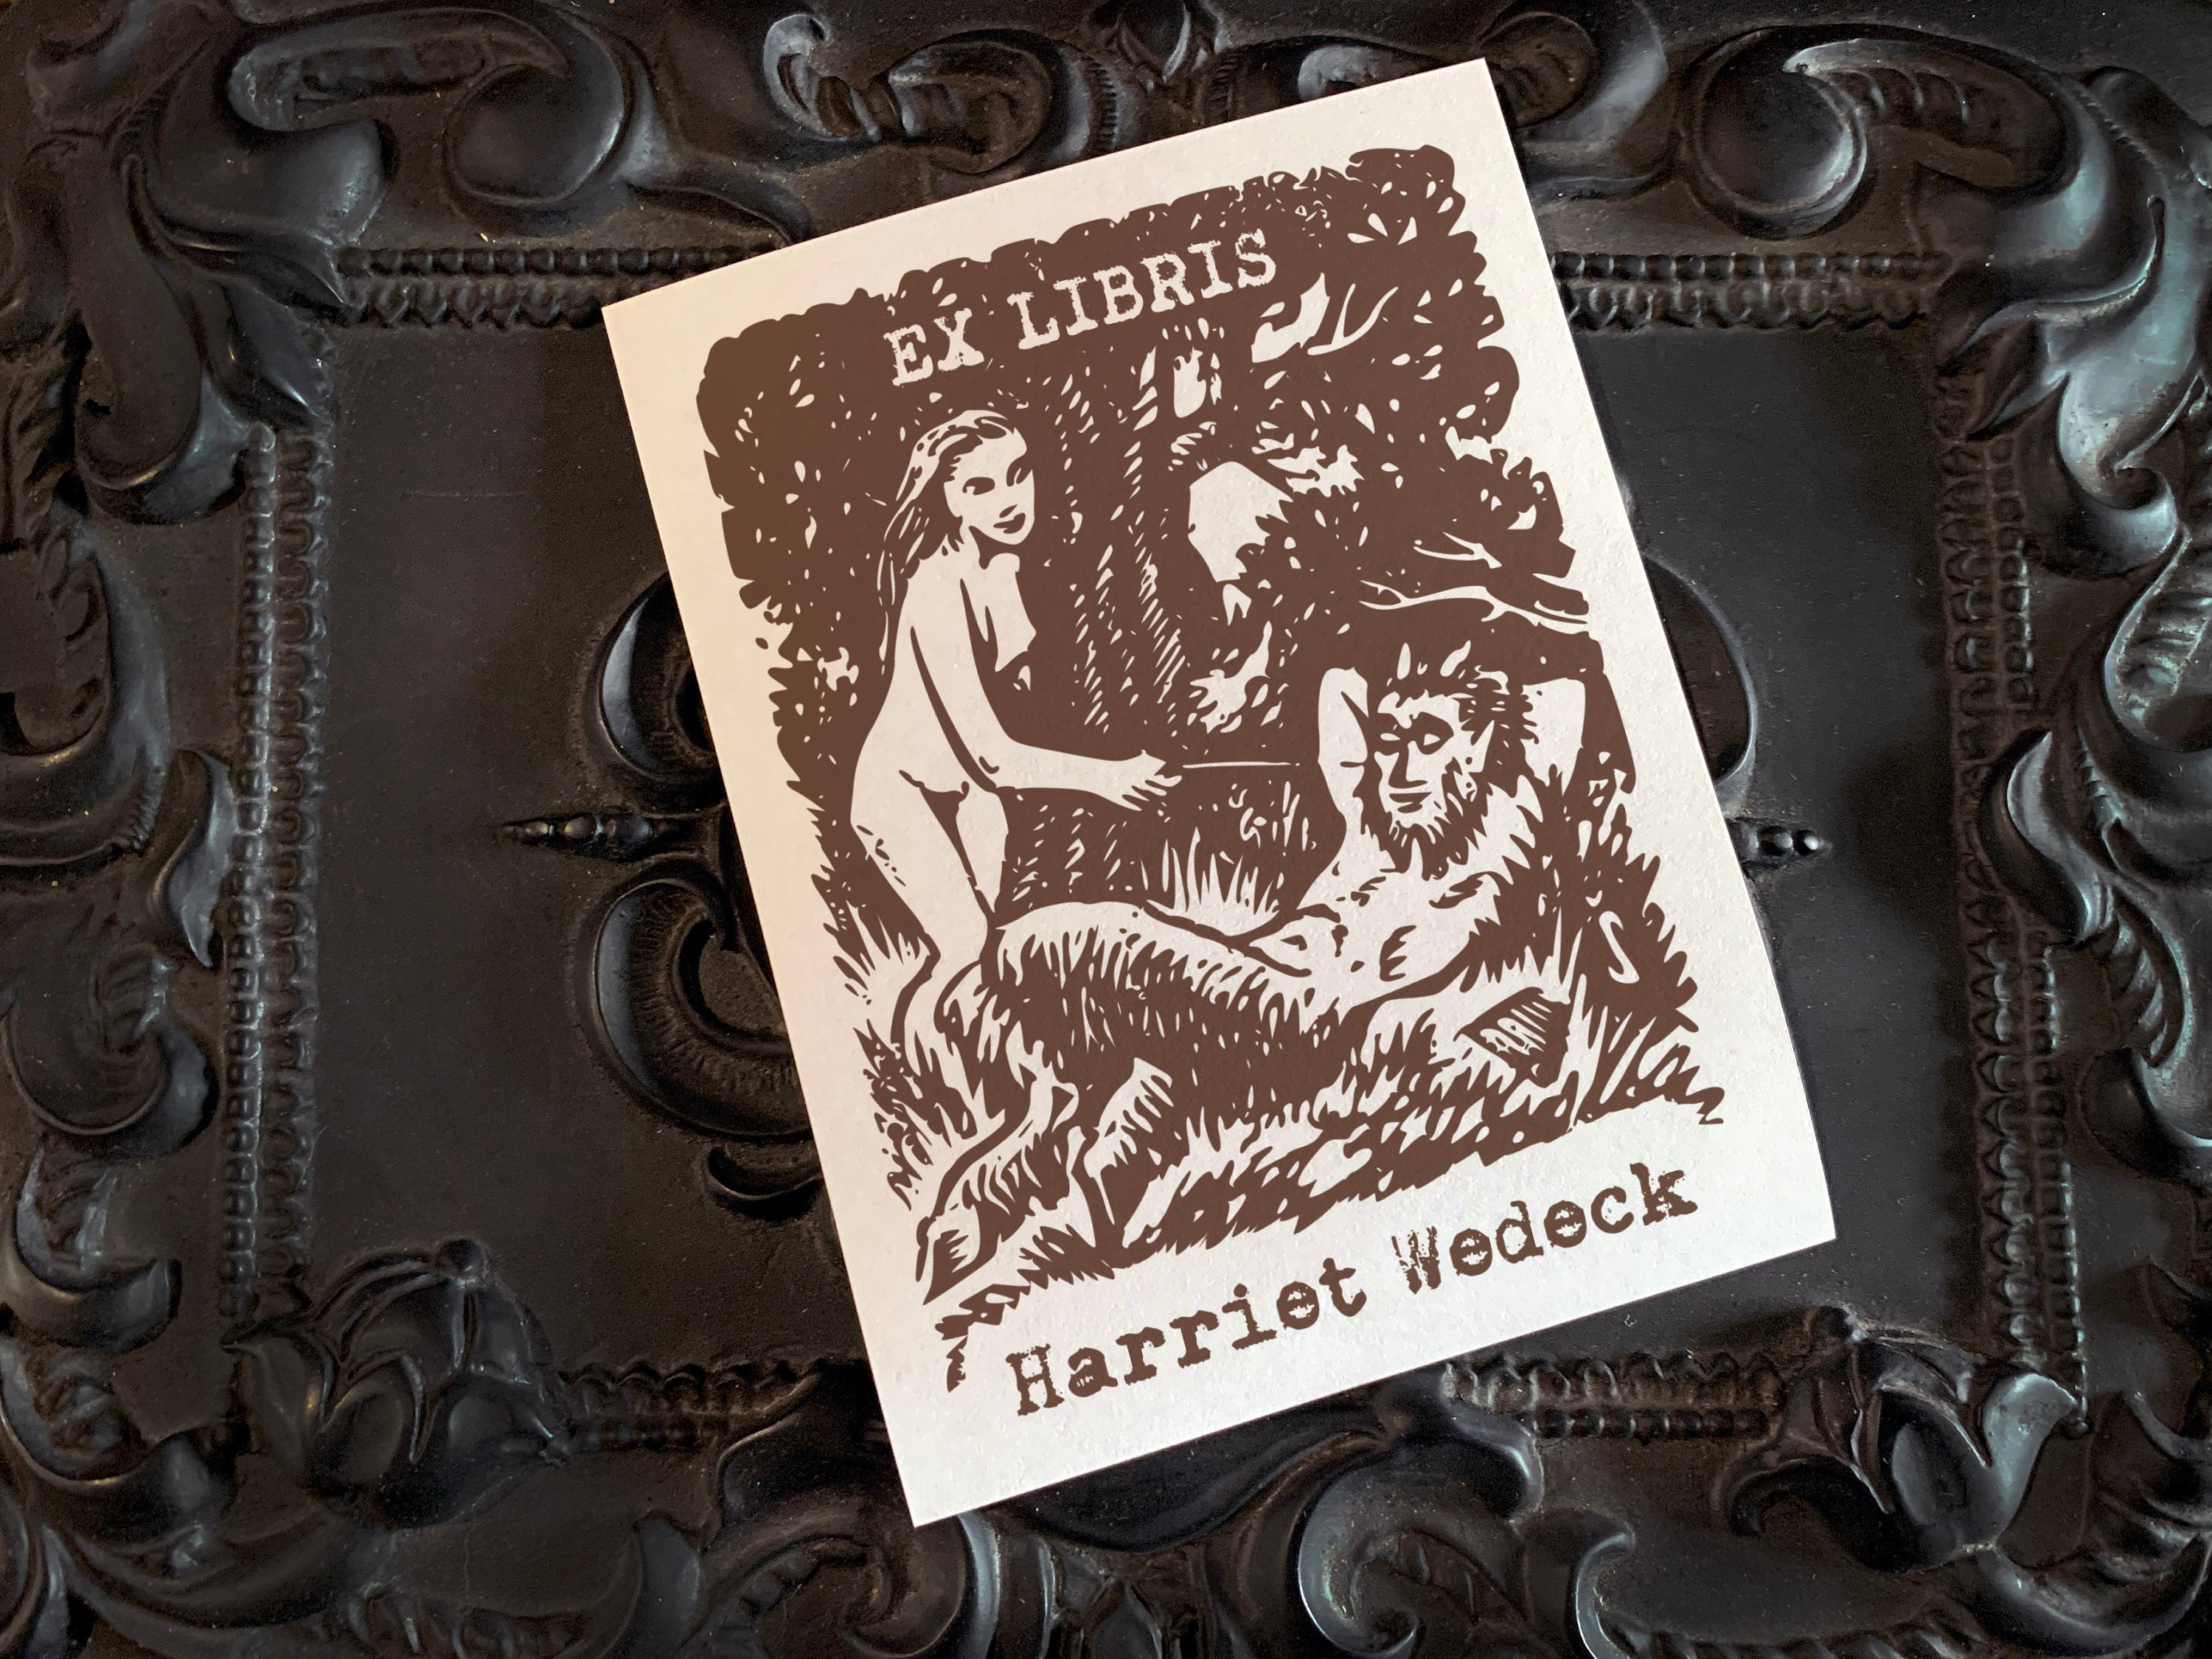 Tickled Satyr, Personalized, Erotic Ex-Libris Bookplates, Crafted on Traditional Gummed Paper, 3in x 4in, Set of 30